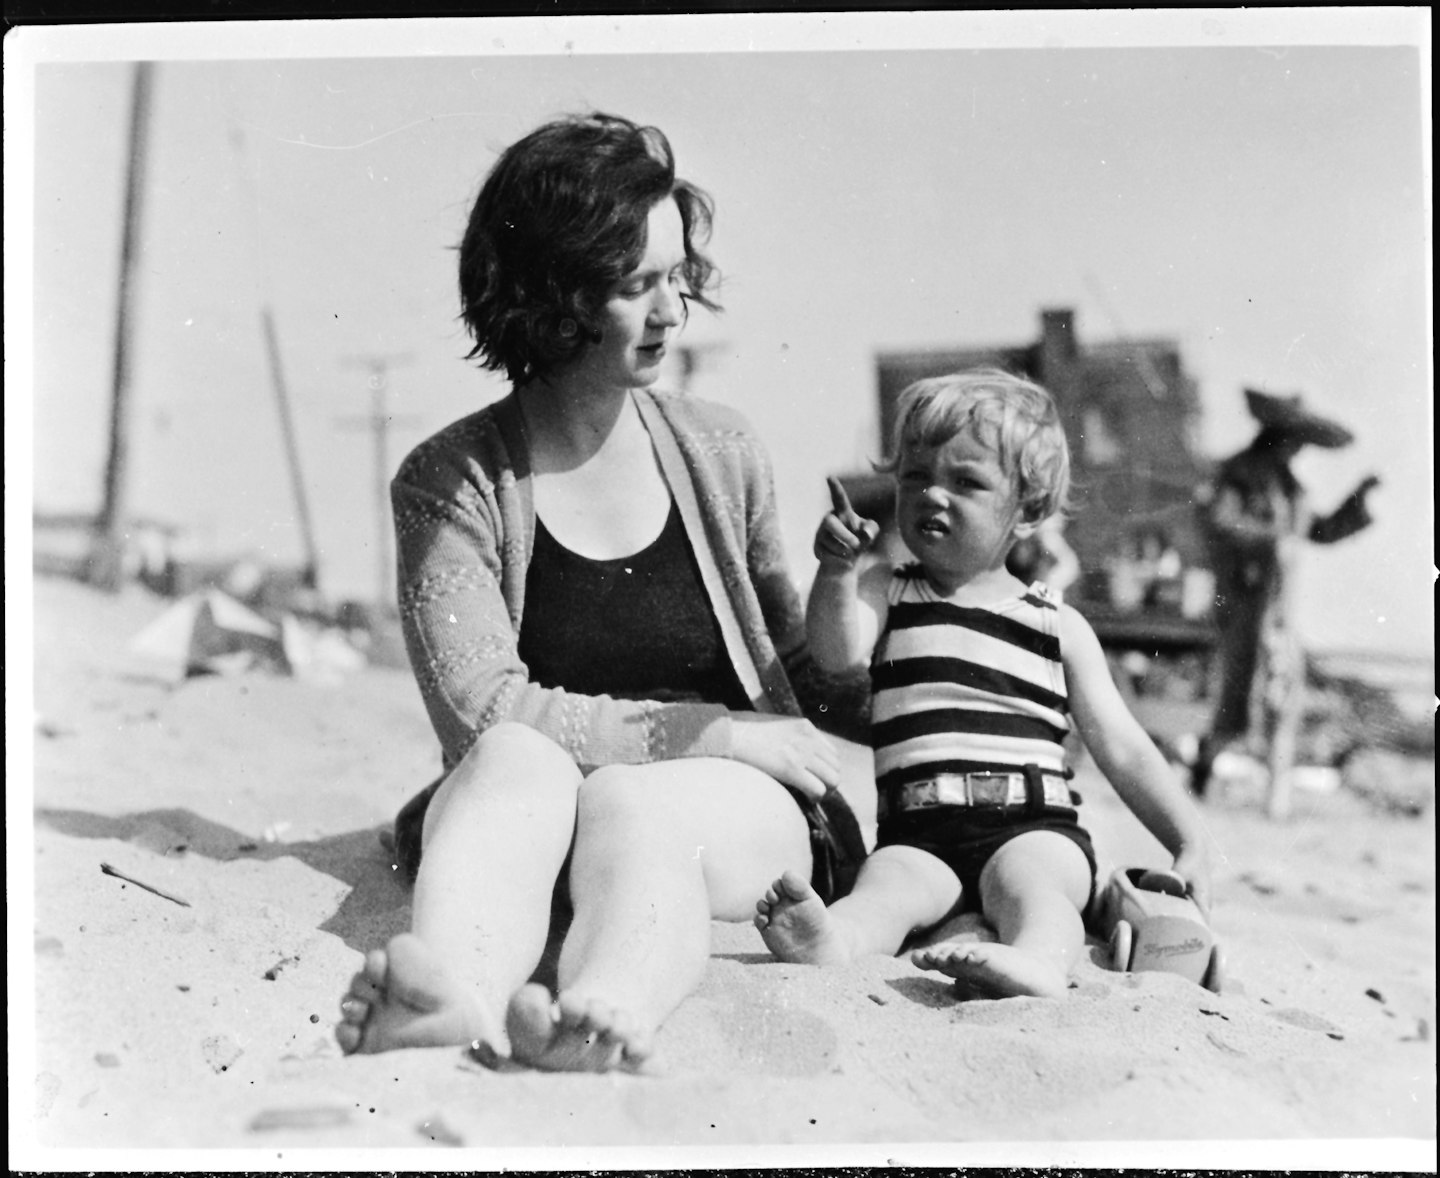 Marilyn Monroe as a child with her mum on the beach